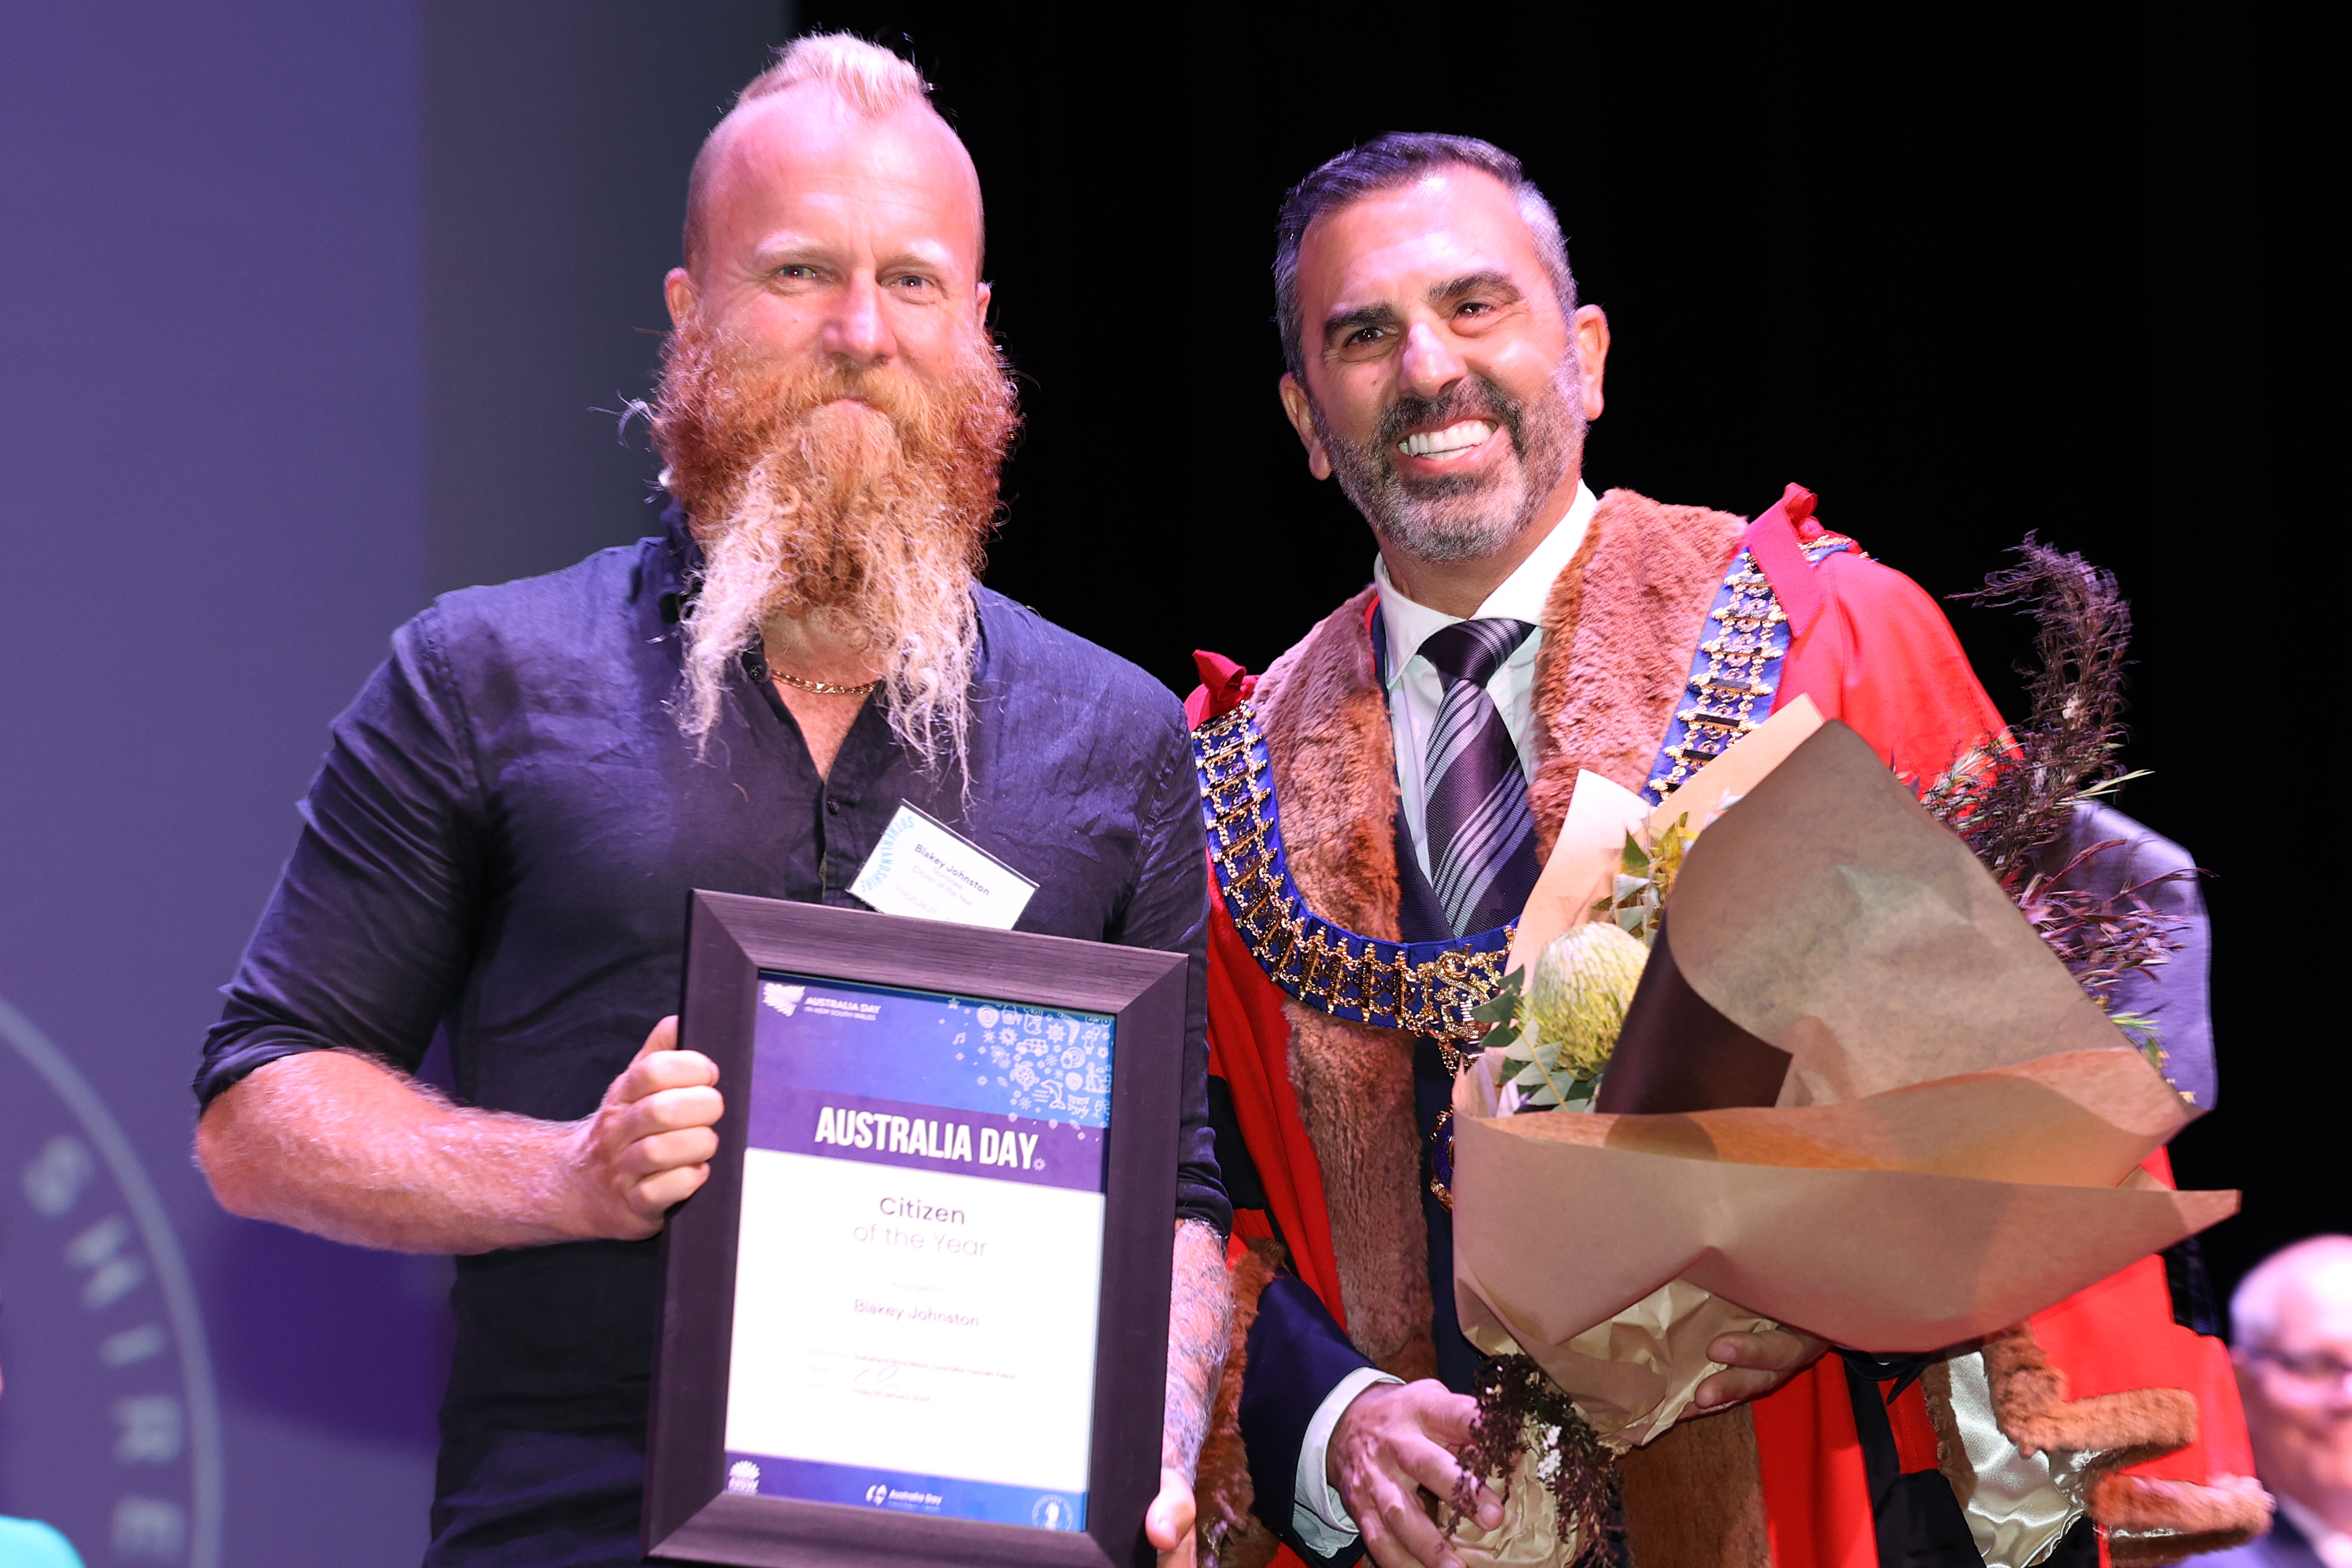 Sutherland Shire Council Australia Day Awards - Citizen of the Year Blakey Johnston with Sutherland Shire Mayor, Councillor Carmelo Pesce